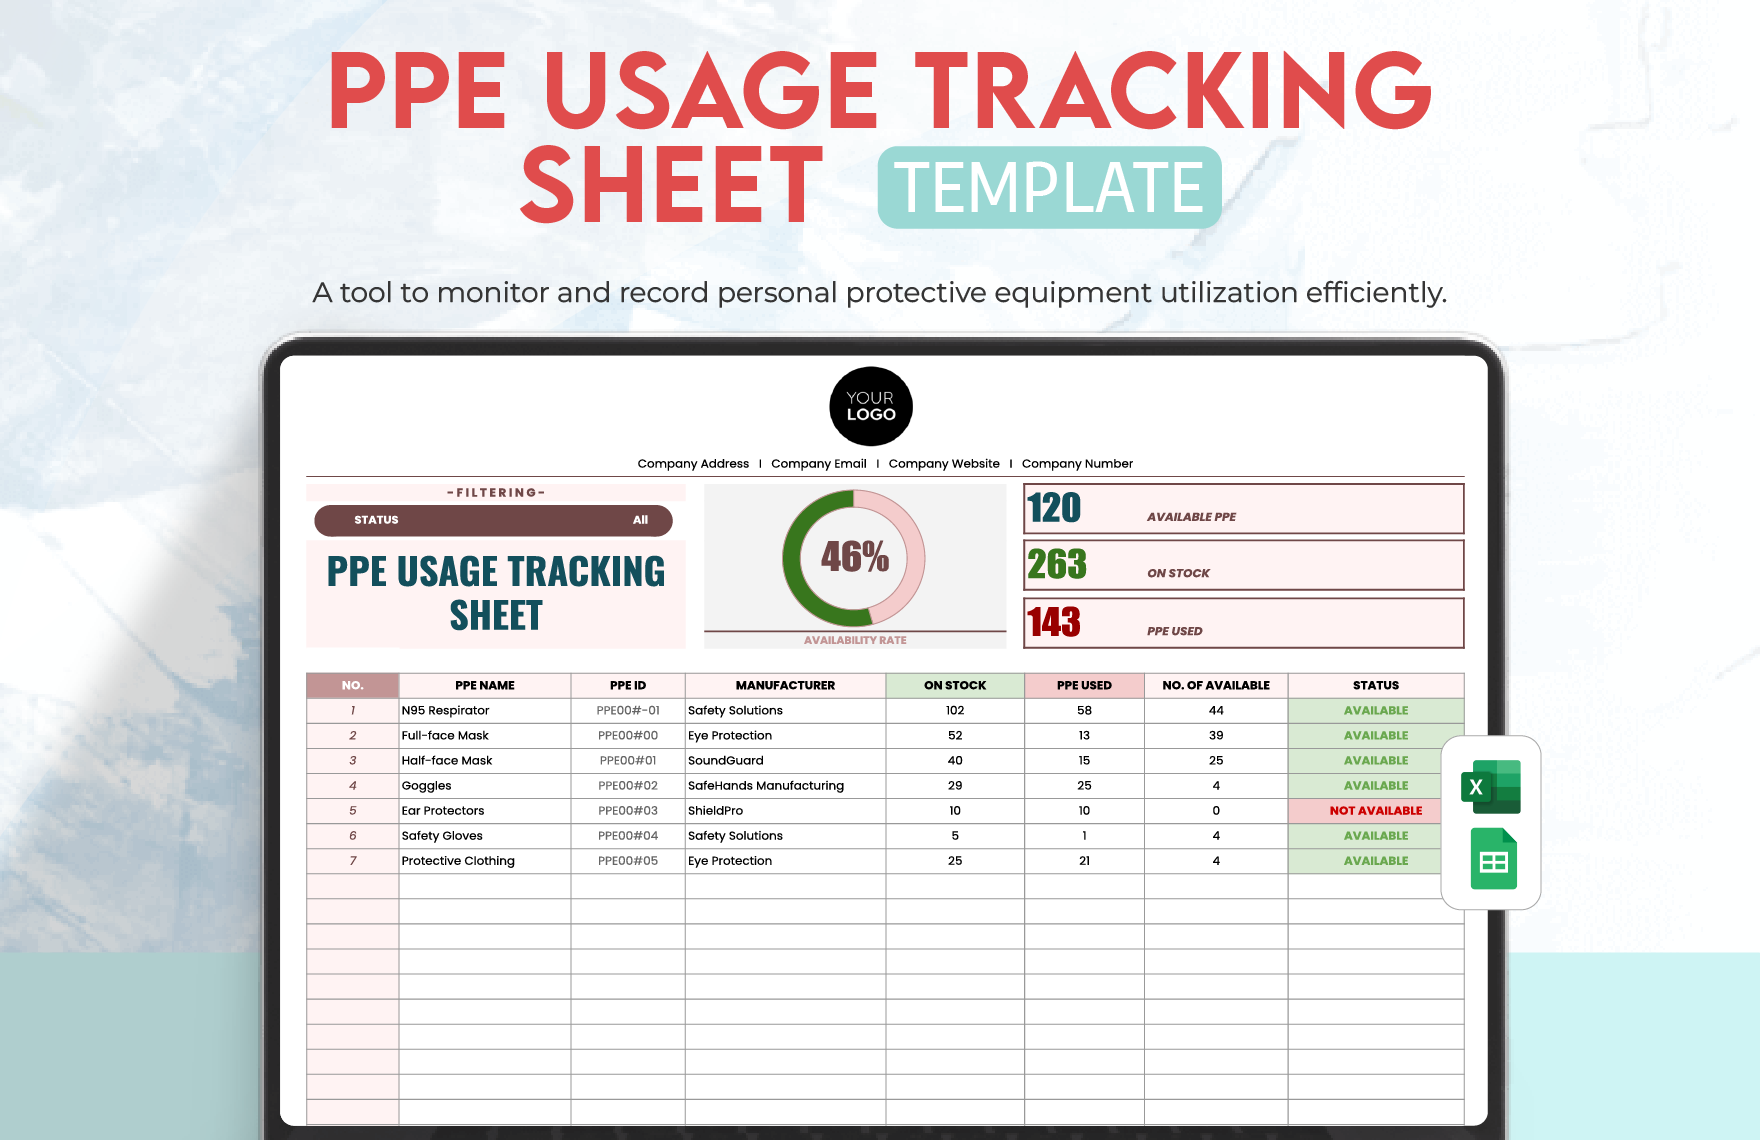 PPE Usage Tracking Sheet Template in Excel, Google Sheets